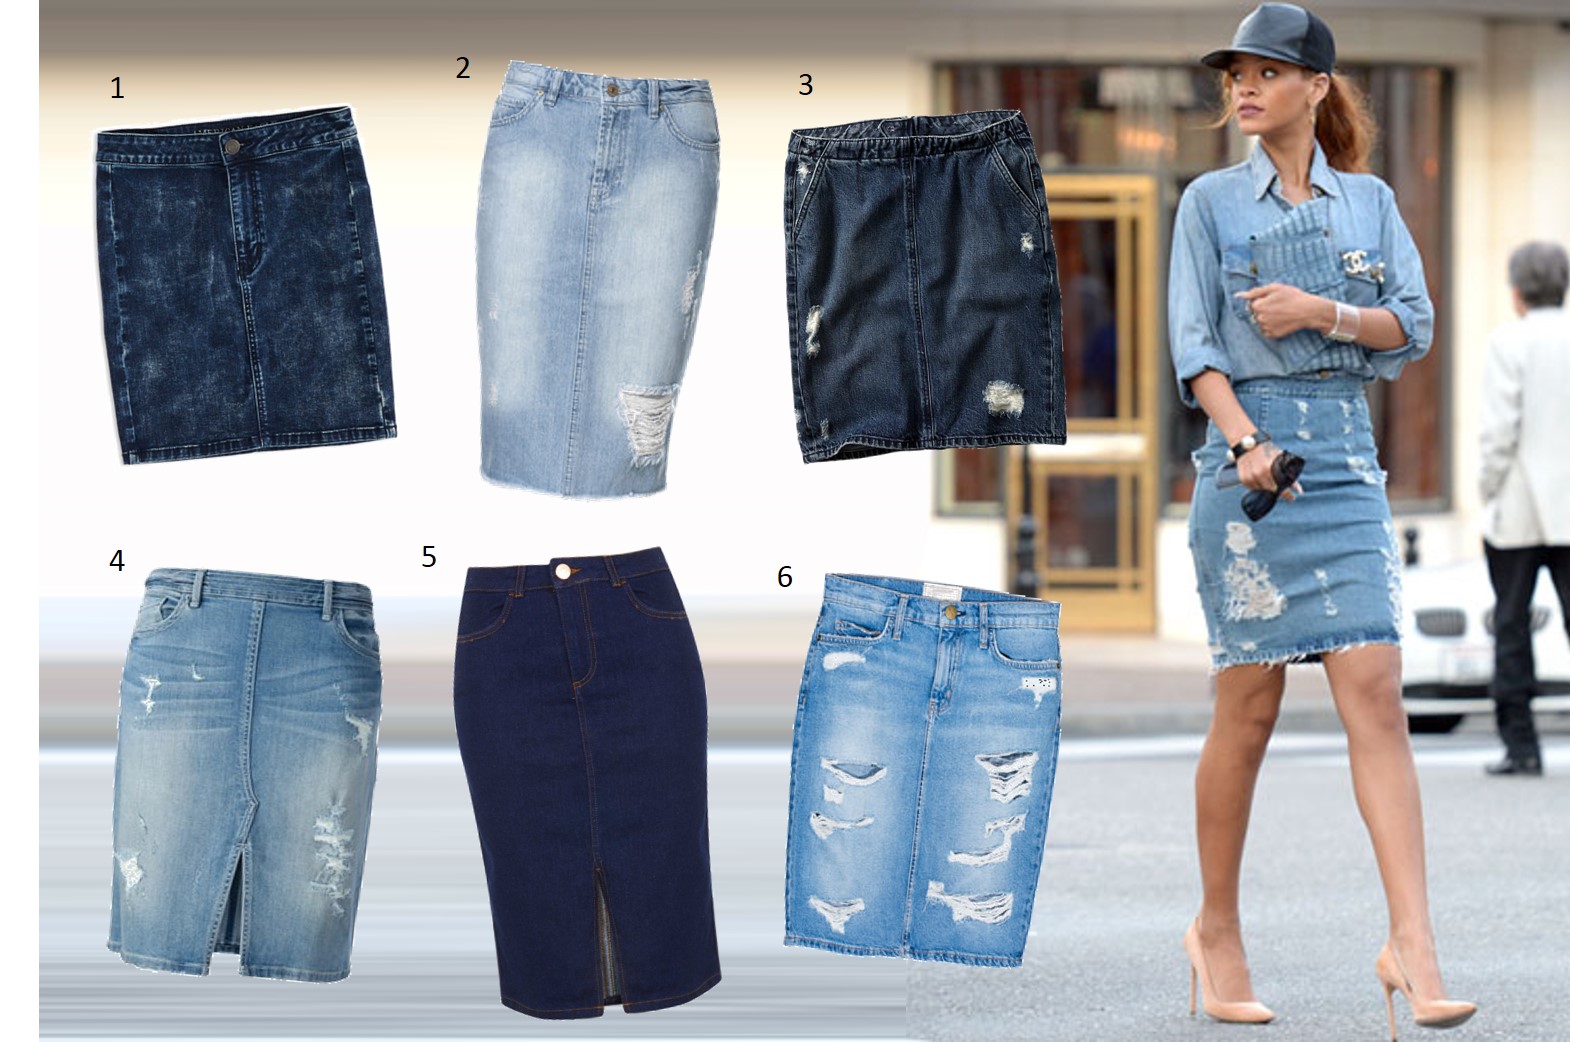 Here, There, Everywhere: The Distressed Denim Skirt - Listen to Lena